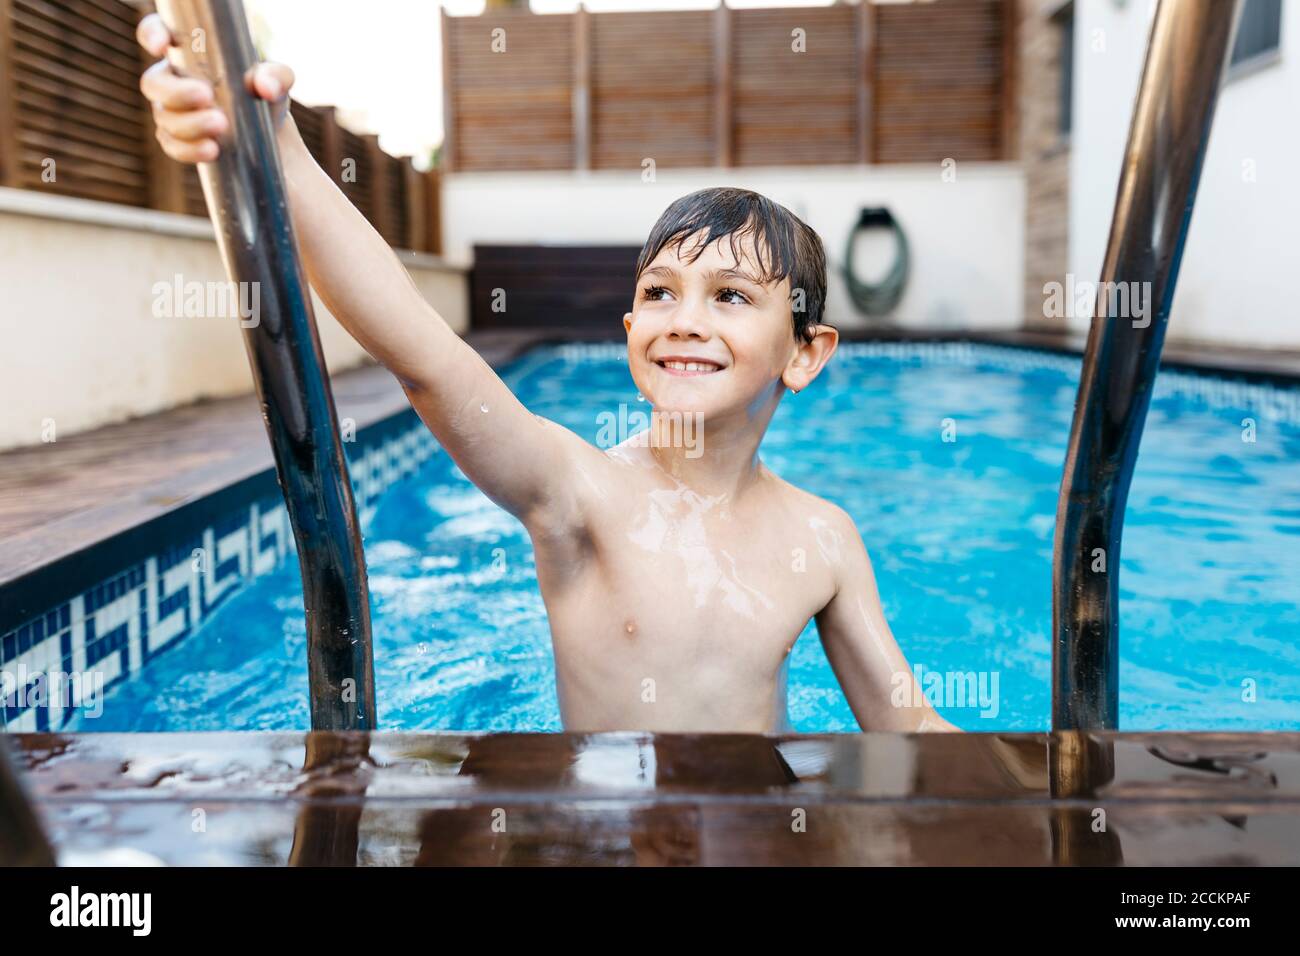 Smiling boy holding ladder in swimming pool Stock Photo